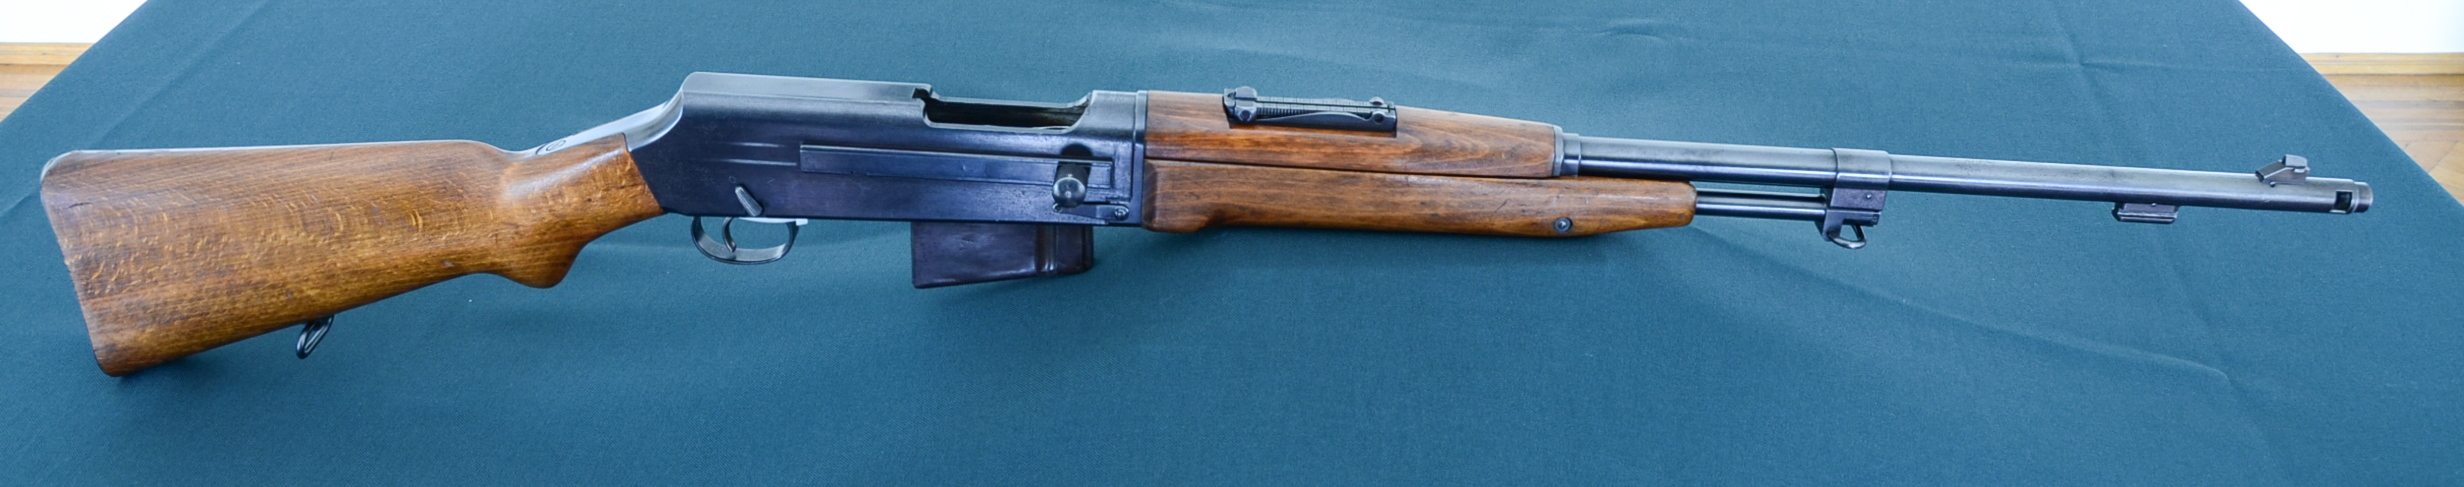 38M Semi-automatic rifle 'Maroszek', photo courtesy of the Ministry of Foreign Affairs